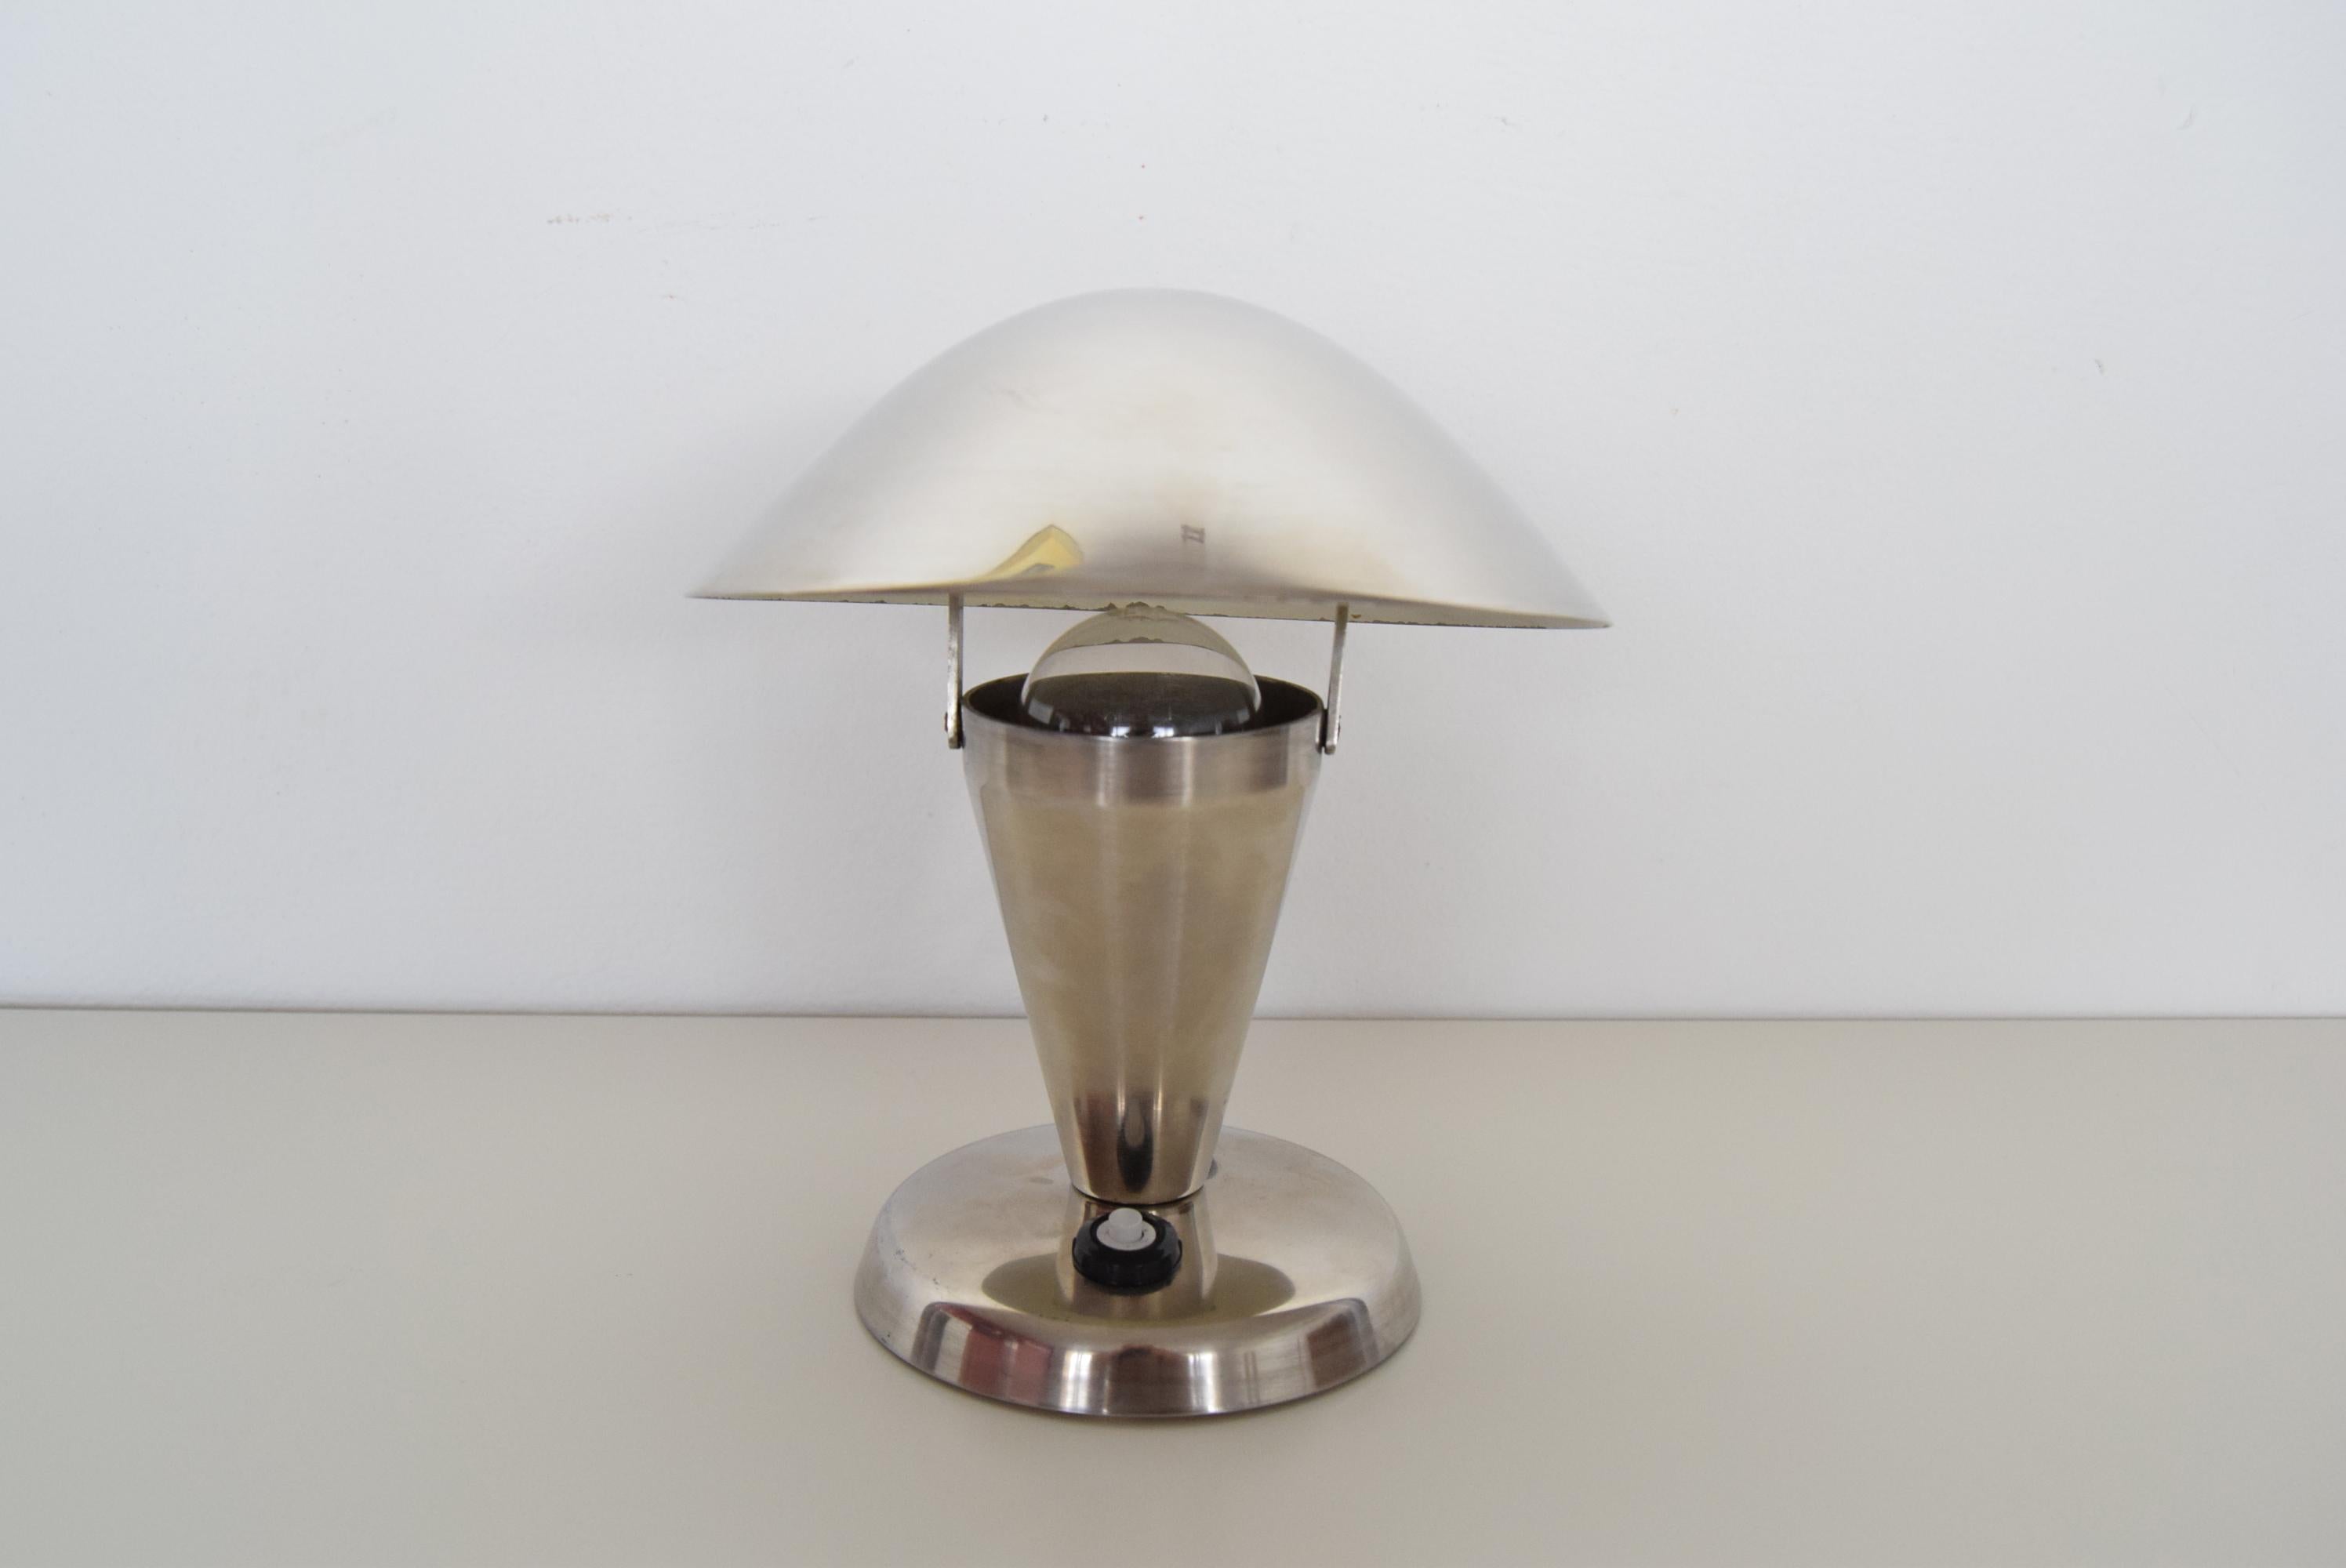 
Adjustable Shade
Made of Chrome,Plastic
The lamp was completely disassembled and cleaned and polished
Was fitted with a new electrical installation
1x40W,E27 or E26bulb,US adapter included
Good Original condition